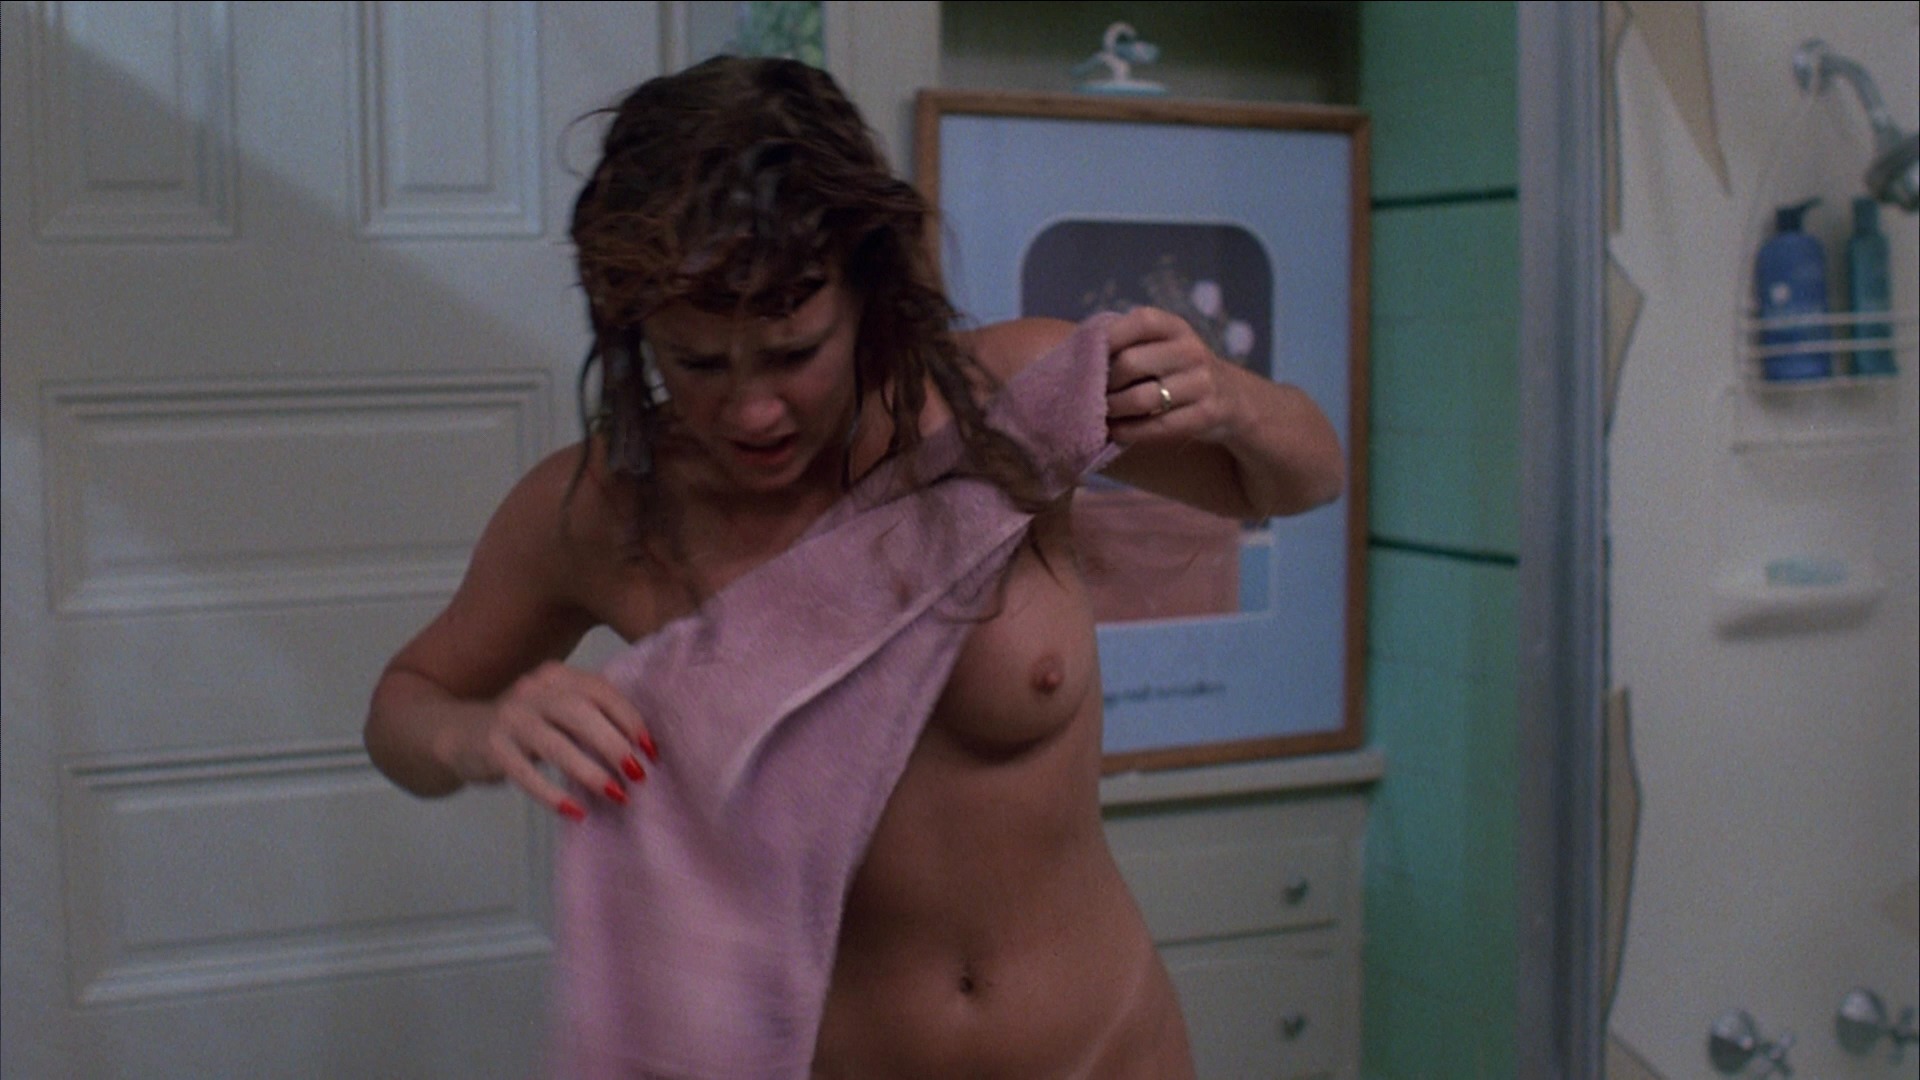 Tawny Kitaen #stripping topless in the bathroom. 